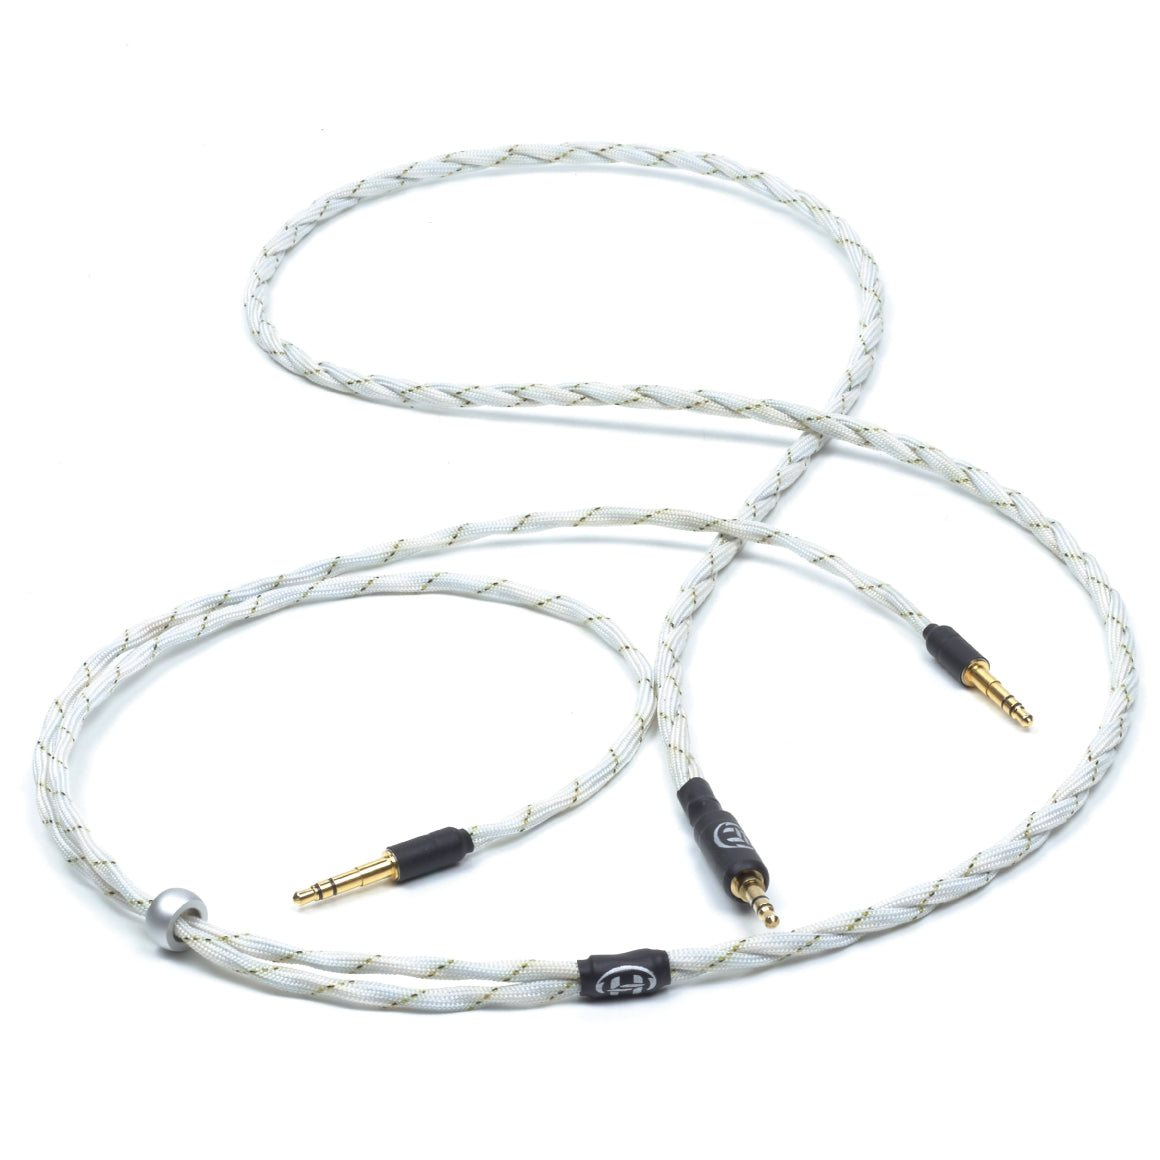 Headphone-Zone-Headgear Audio - Upgrade Cable for Beyerdynamic T1 2nd Generation / T5p Second Generation/ Sleeved - 4 Pin XLR Balanced